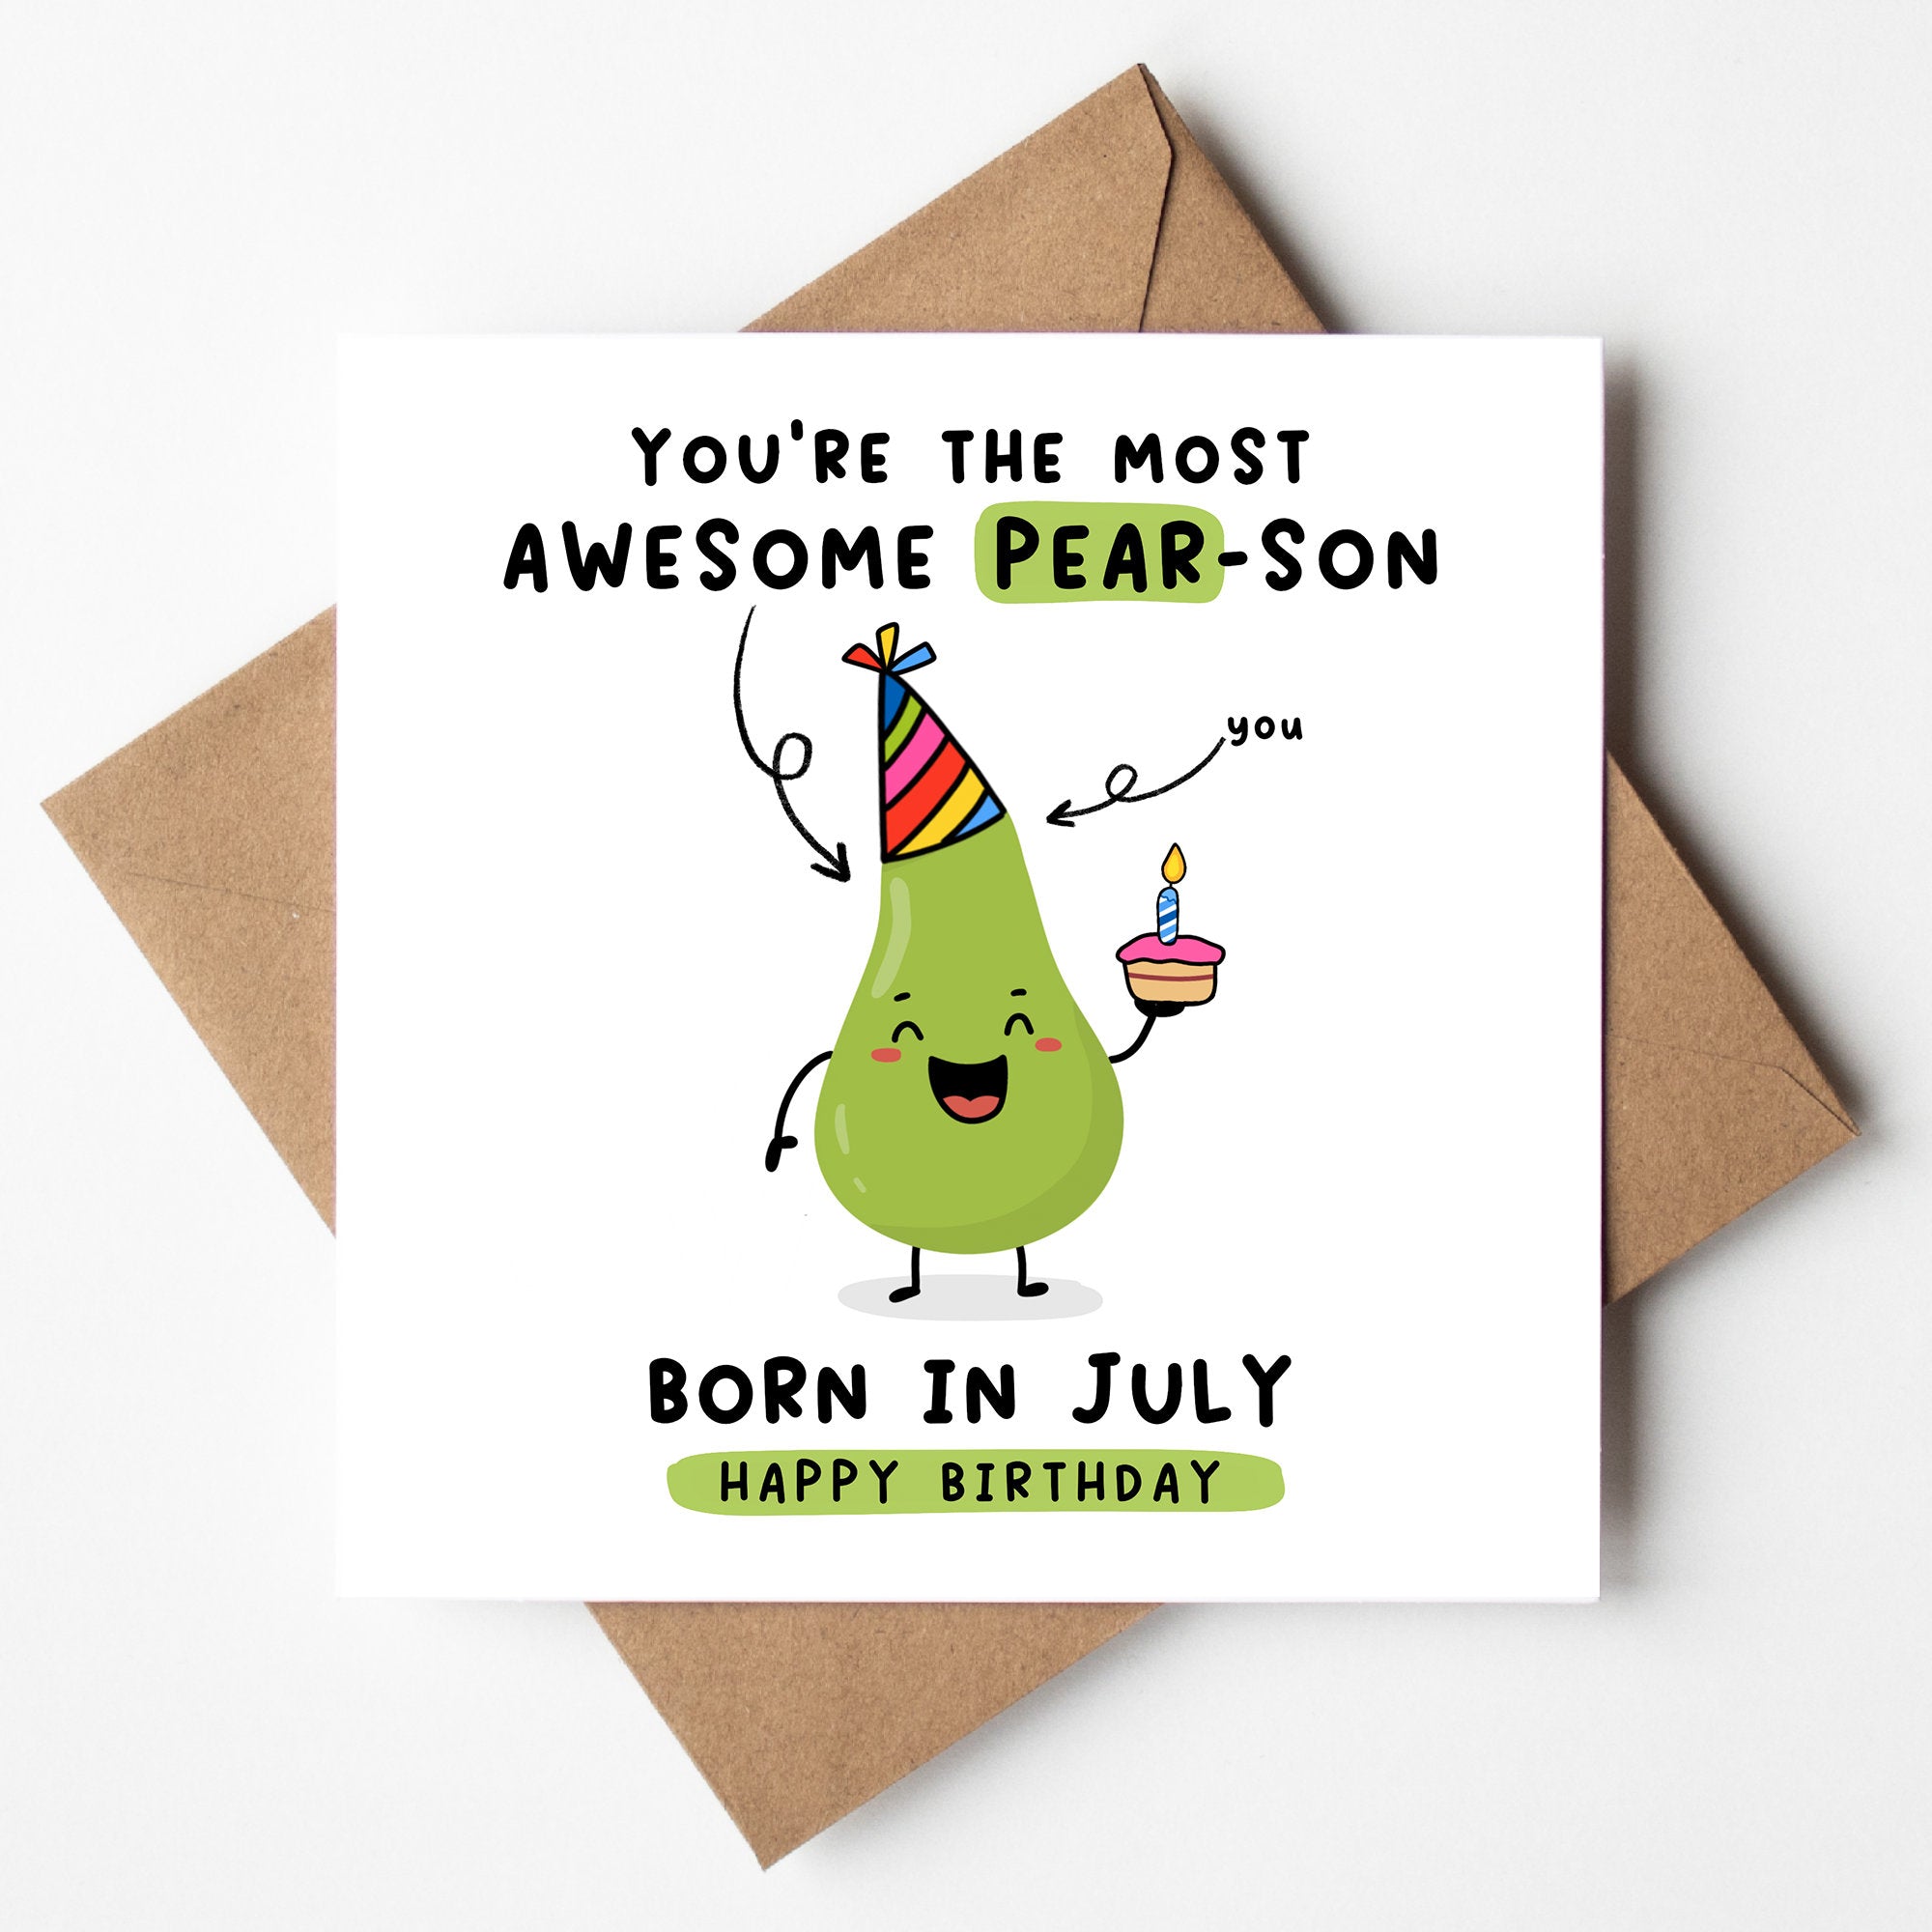 You're The Most Awesome Pear-son born in July, Funny Pun Card, Pear Pun Card, Born In July, Birth Month Card July